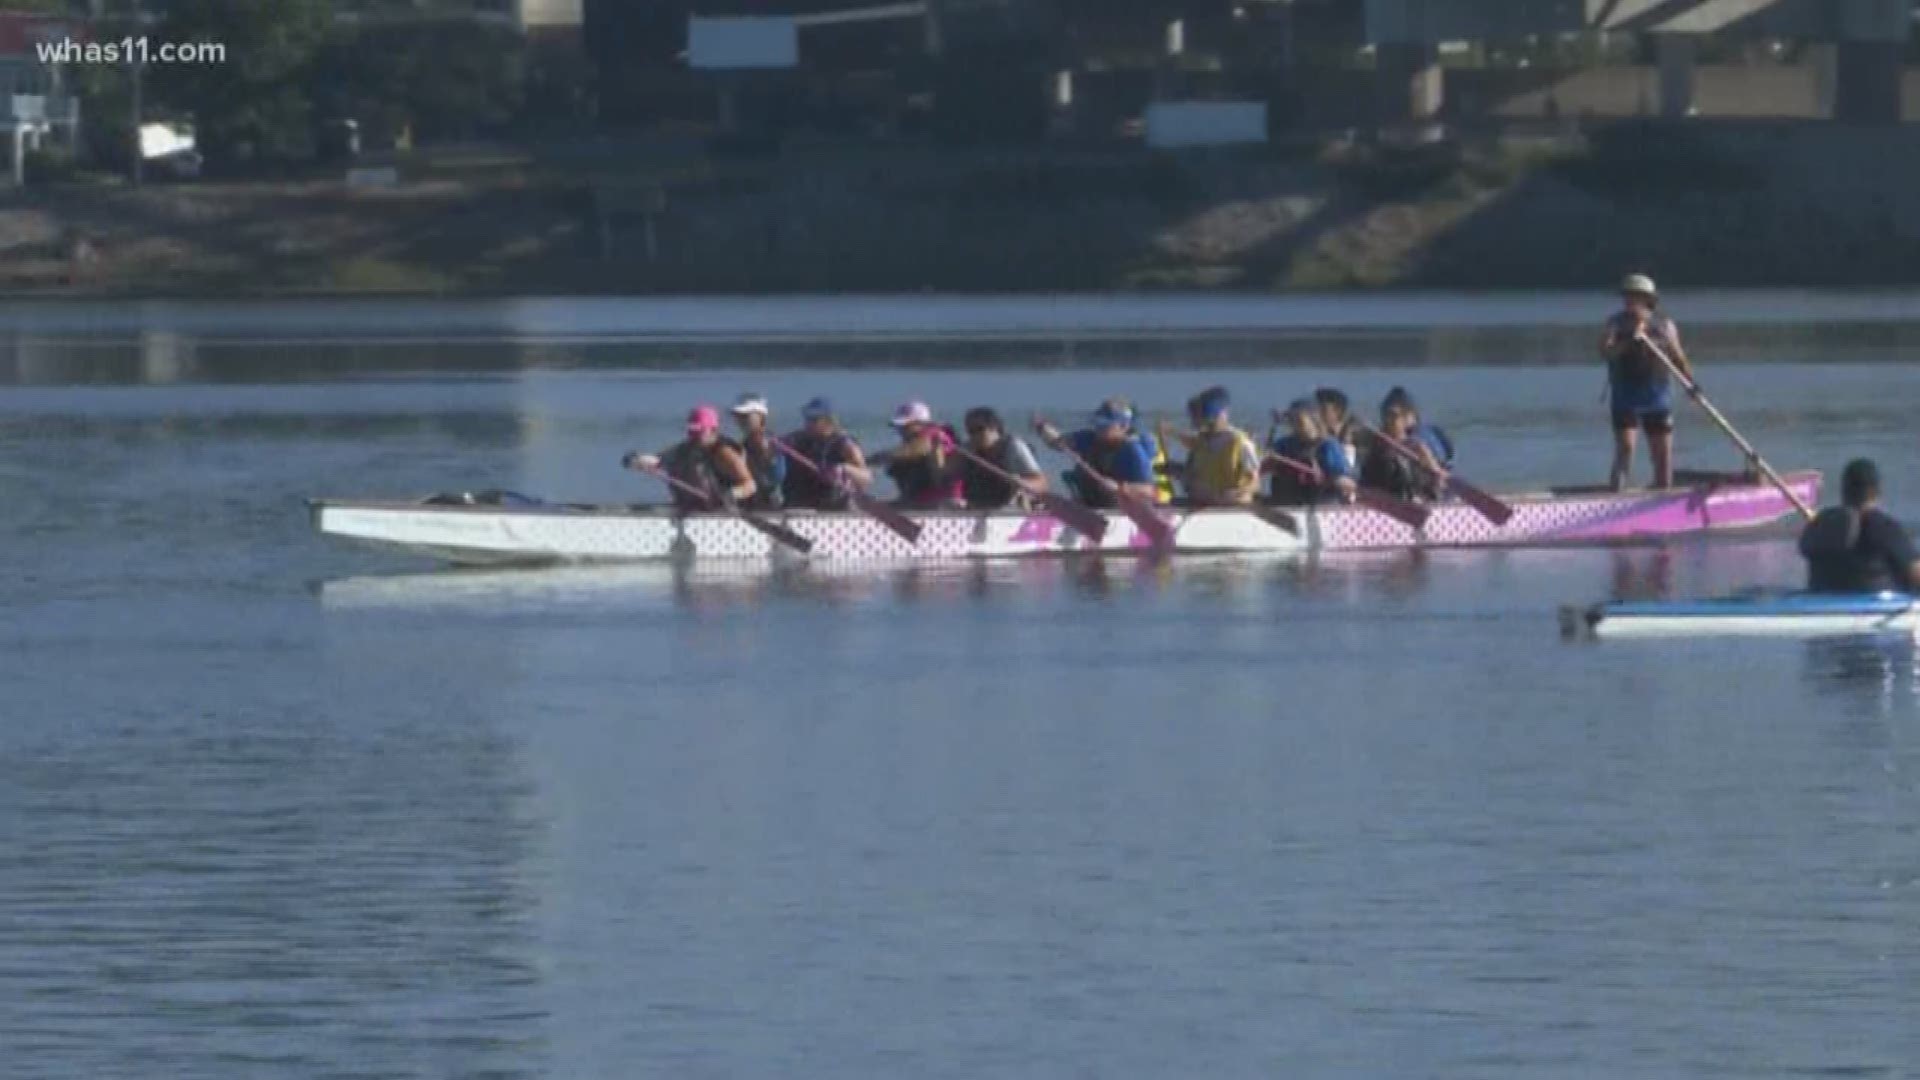 The Derby City Dragons will take part in the 2018 "Paddling for the Pink' Dragon Boat Festval at Campbell County Lake in northern Kentucky on September 8th, which raises money for breast cancer awareness and brings other teams with similar experiences tog